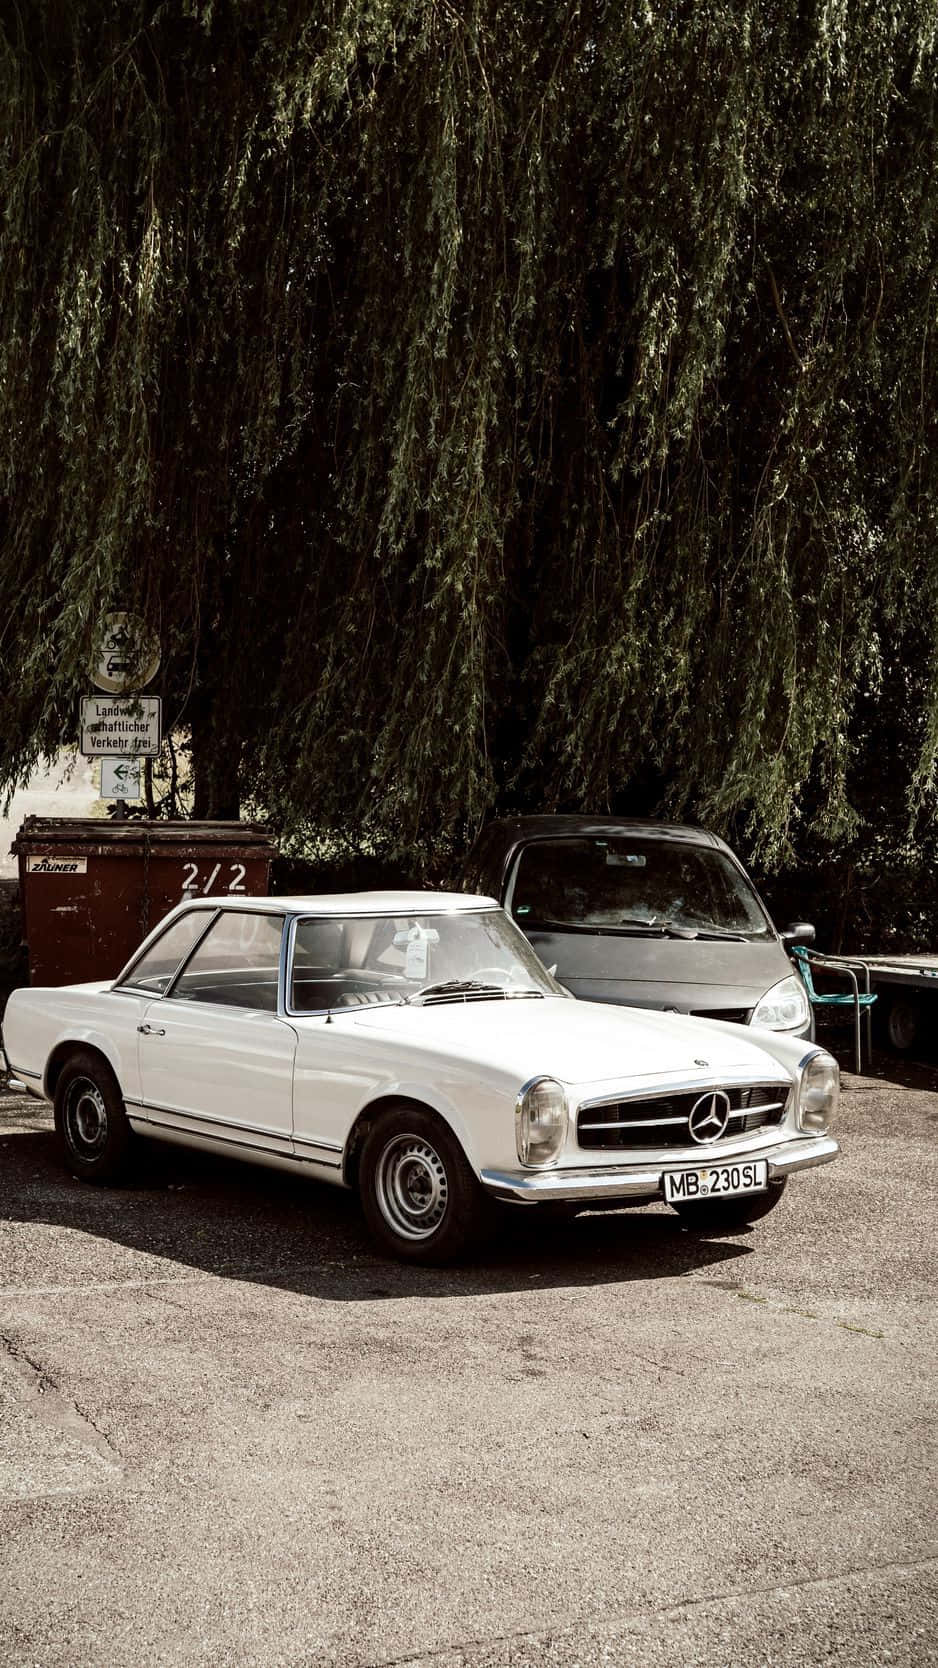 Mercedes Classic White Vintage Iphone Wallpaper